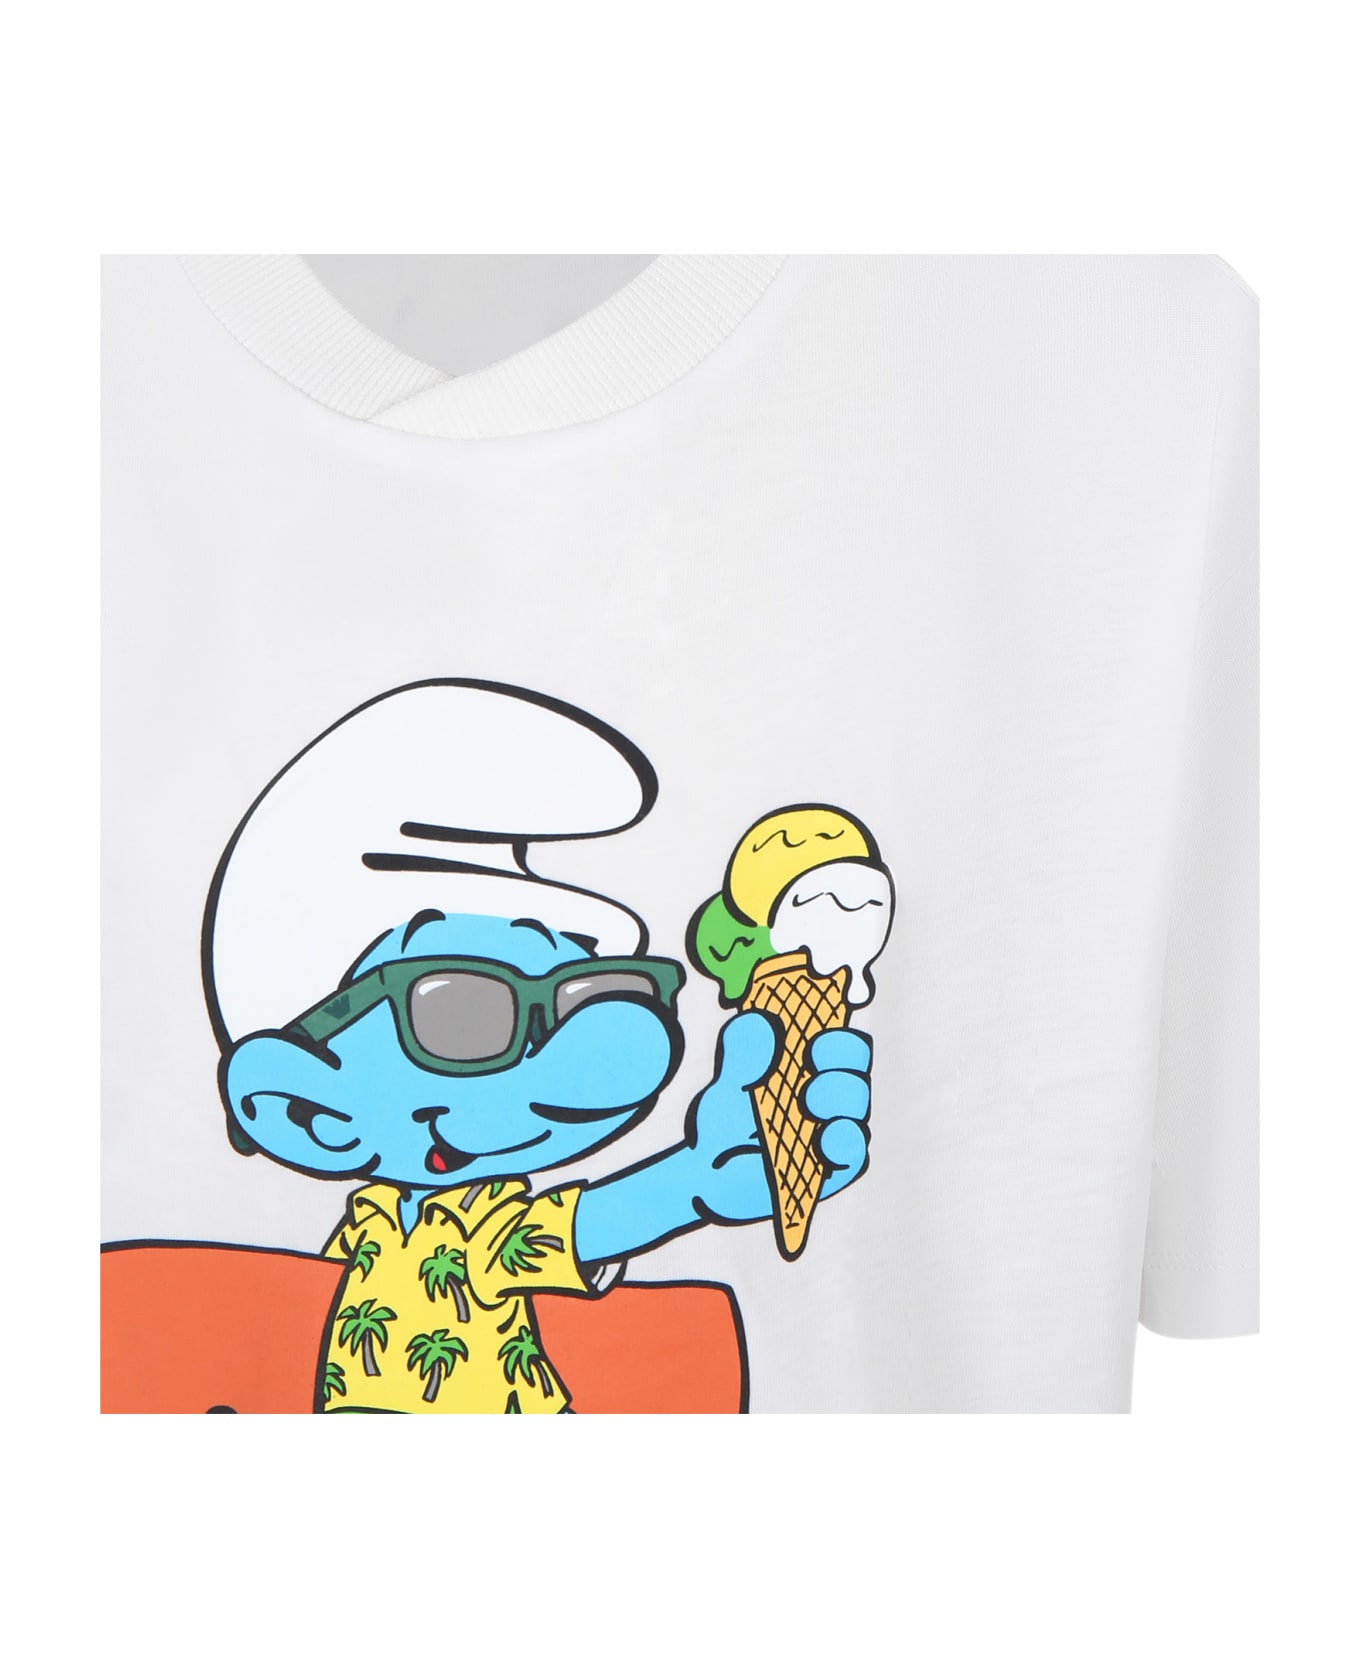 Emporio Armani White T-shirt For Boy With Smurf Print - White Tシャツ＆ポロシャツ